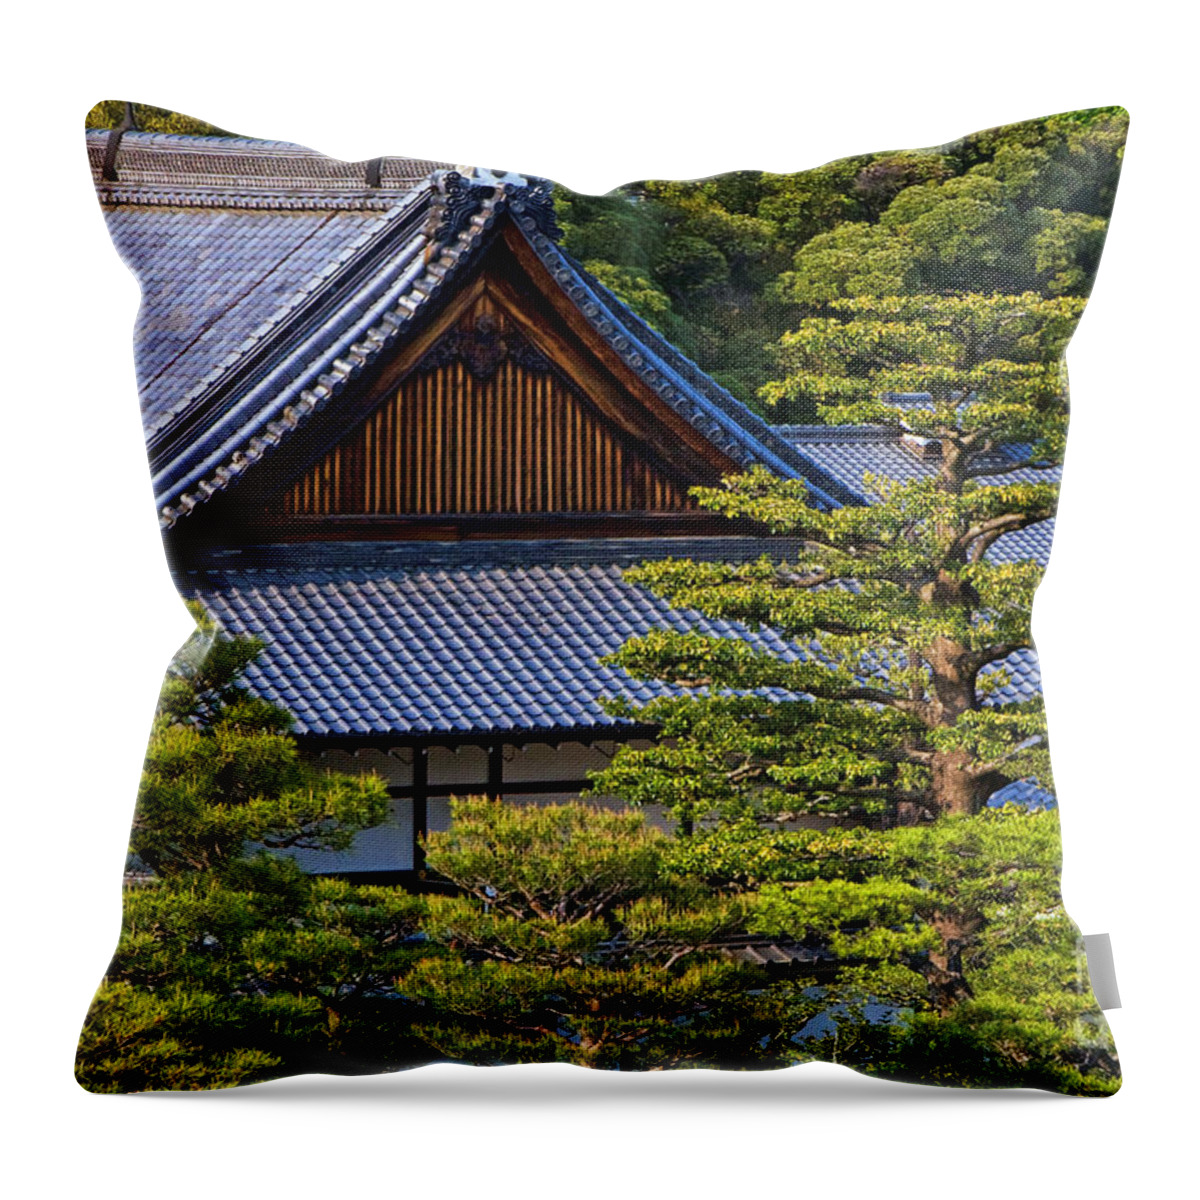 Japan Throw Pillow featuring the photograph Nijo Castle Gardens Kyoto Japan #1 by Waterdancer 